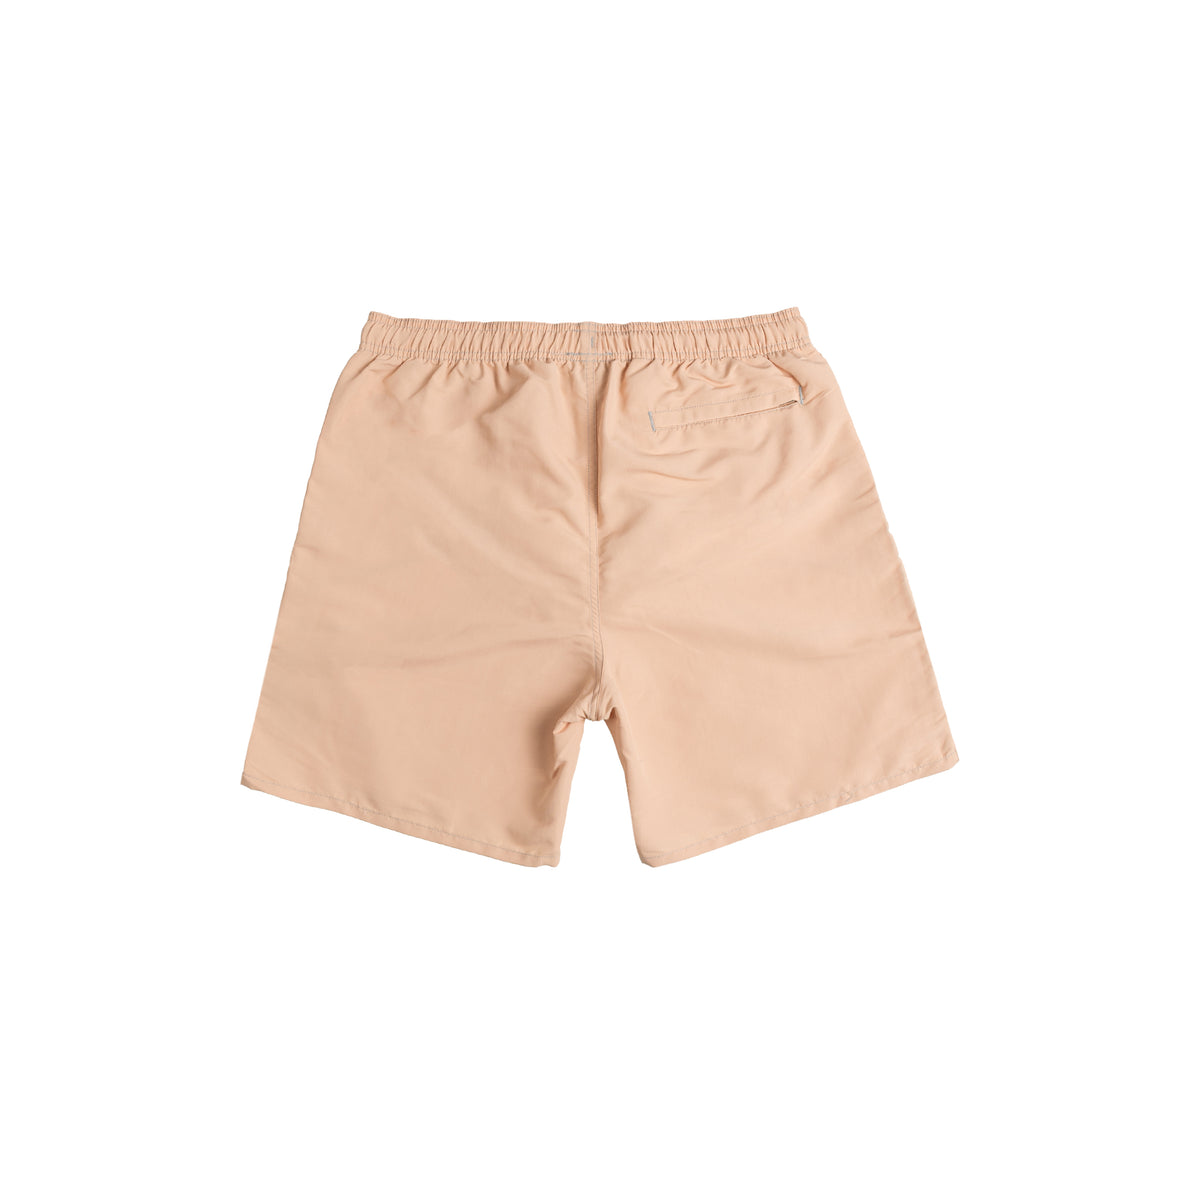 Stussy Surfman Water Shorts – buy now at Asphaltgold Online Store!